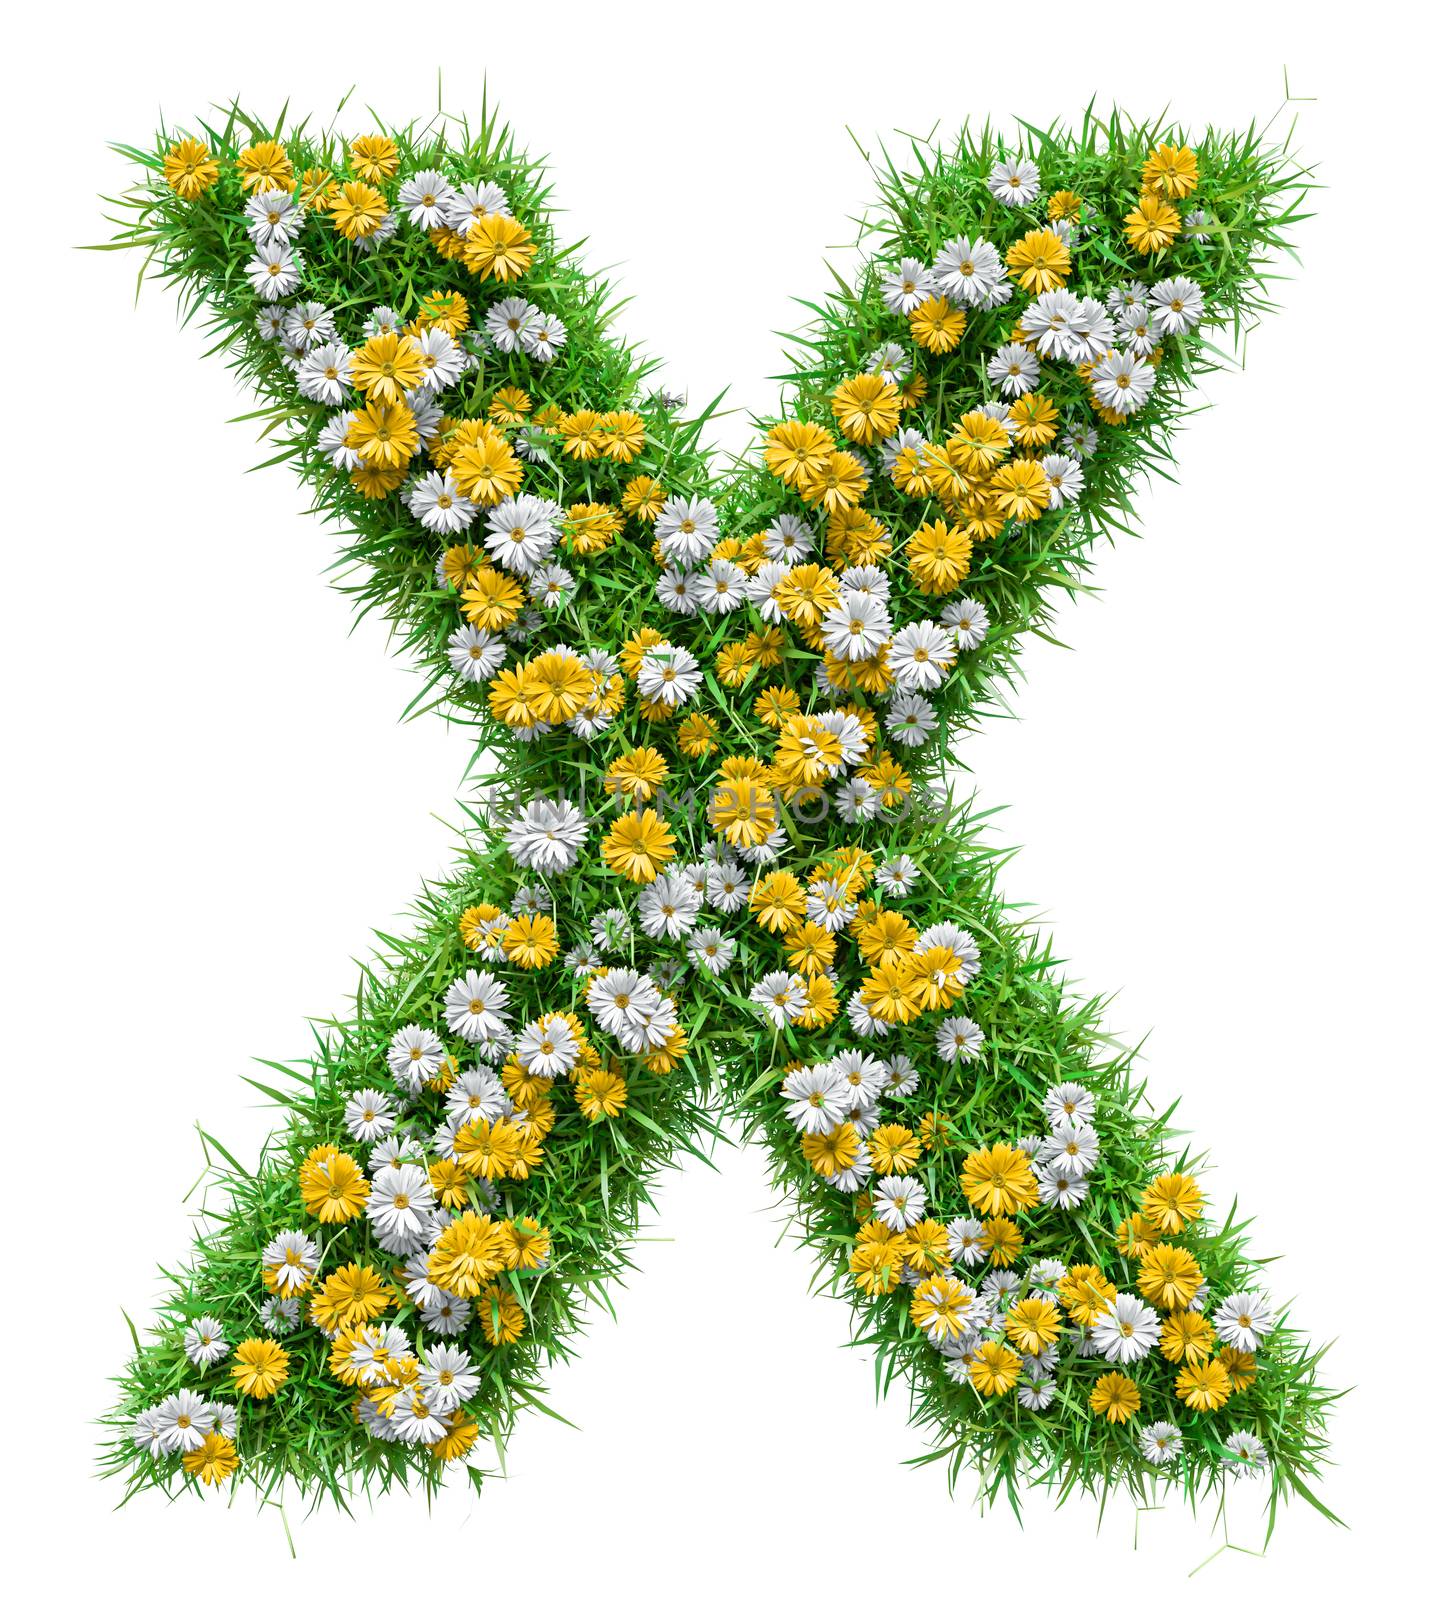 Letter X Of Green Grass And Flowers. Isolated On White Background. Font For Your Design. 3D Illustration